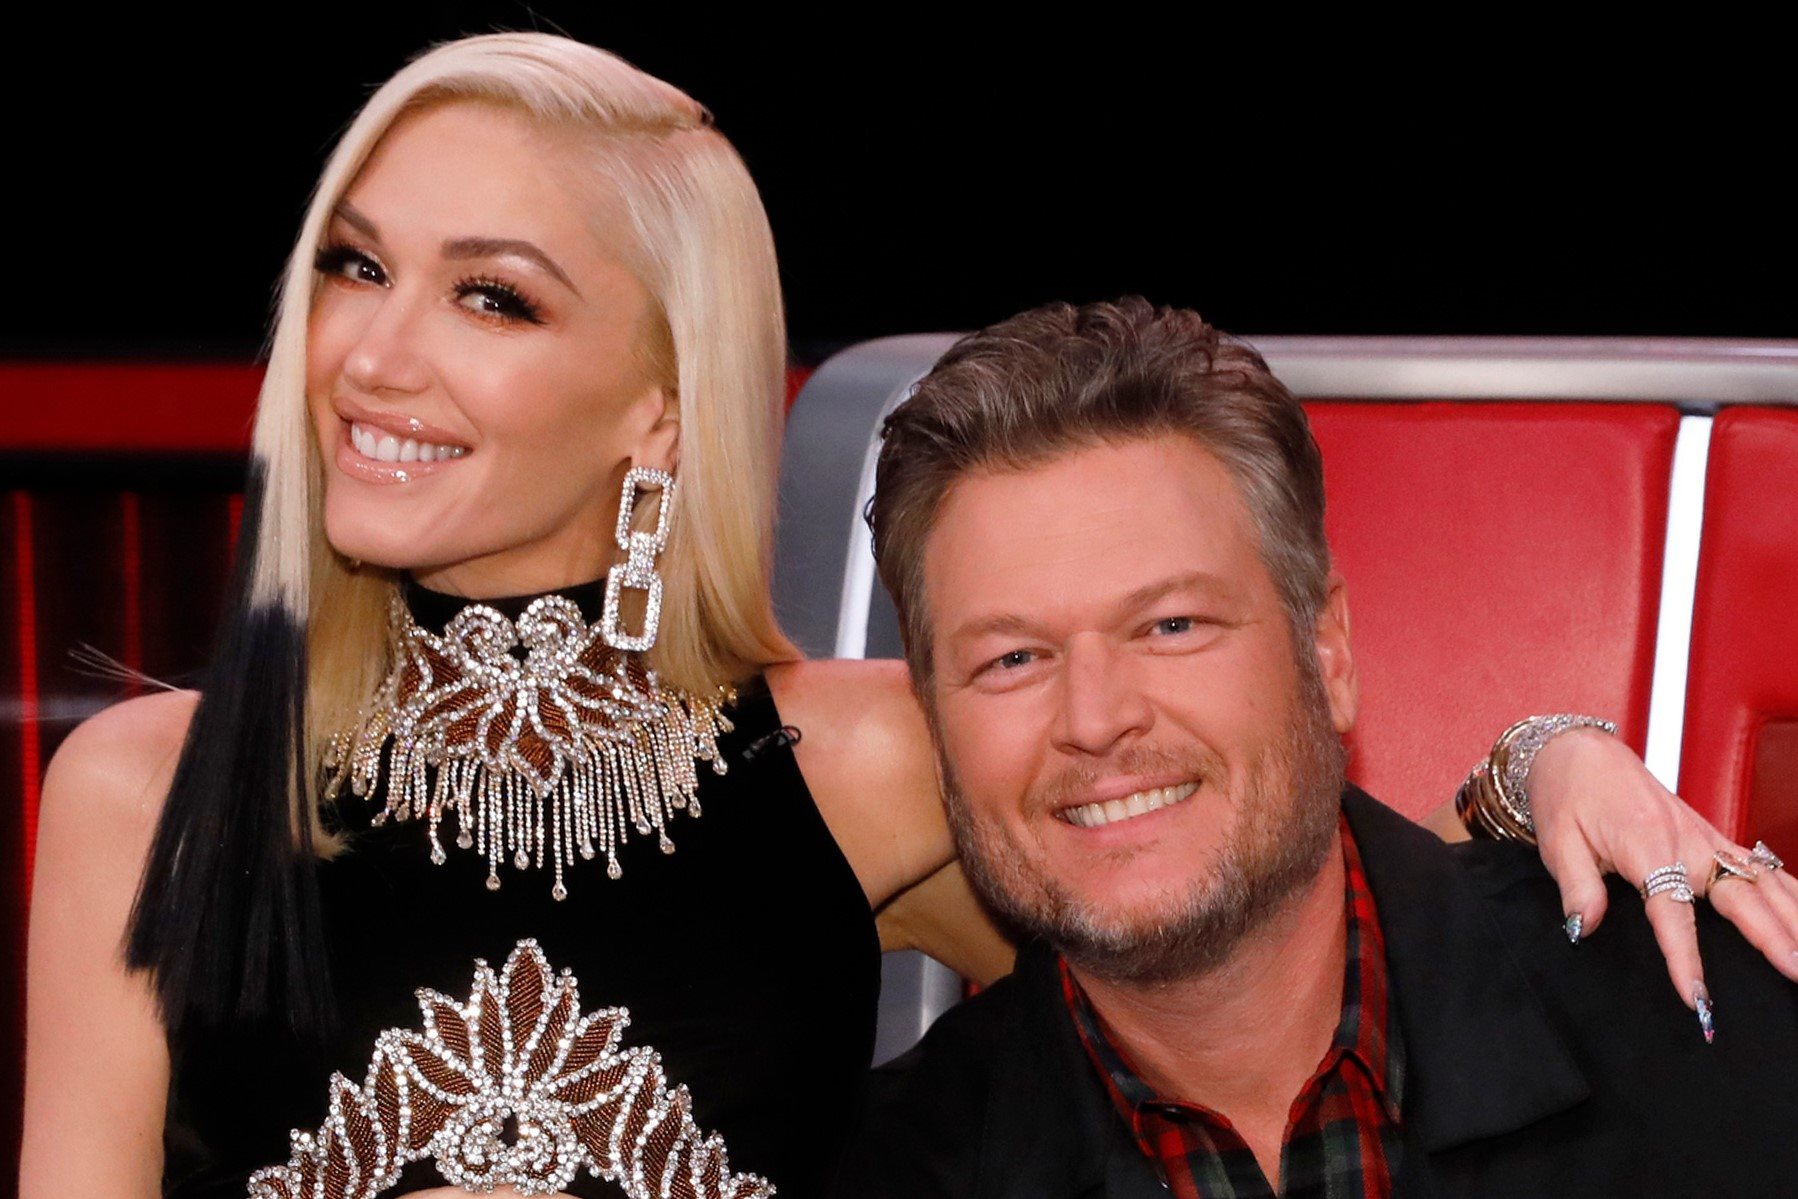 Blake Shelton And Gwen Stefani Face Off In Epic Barmageddon Rematch - Who Will Emerge Victorious?